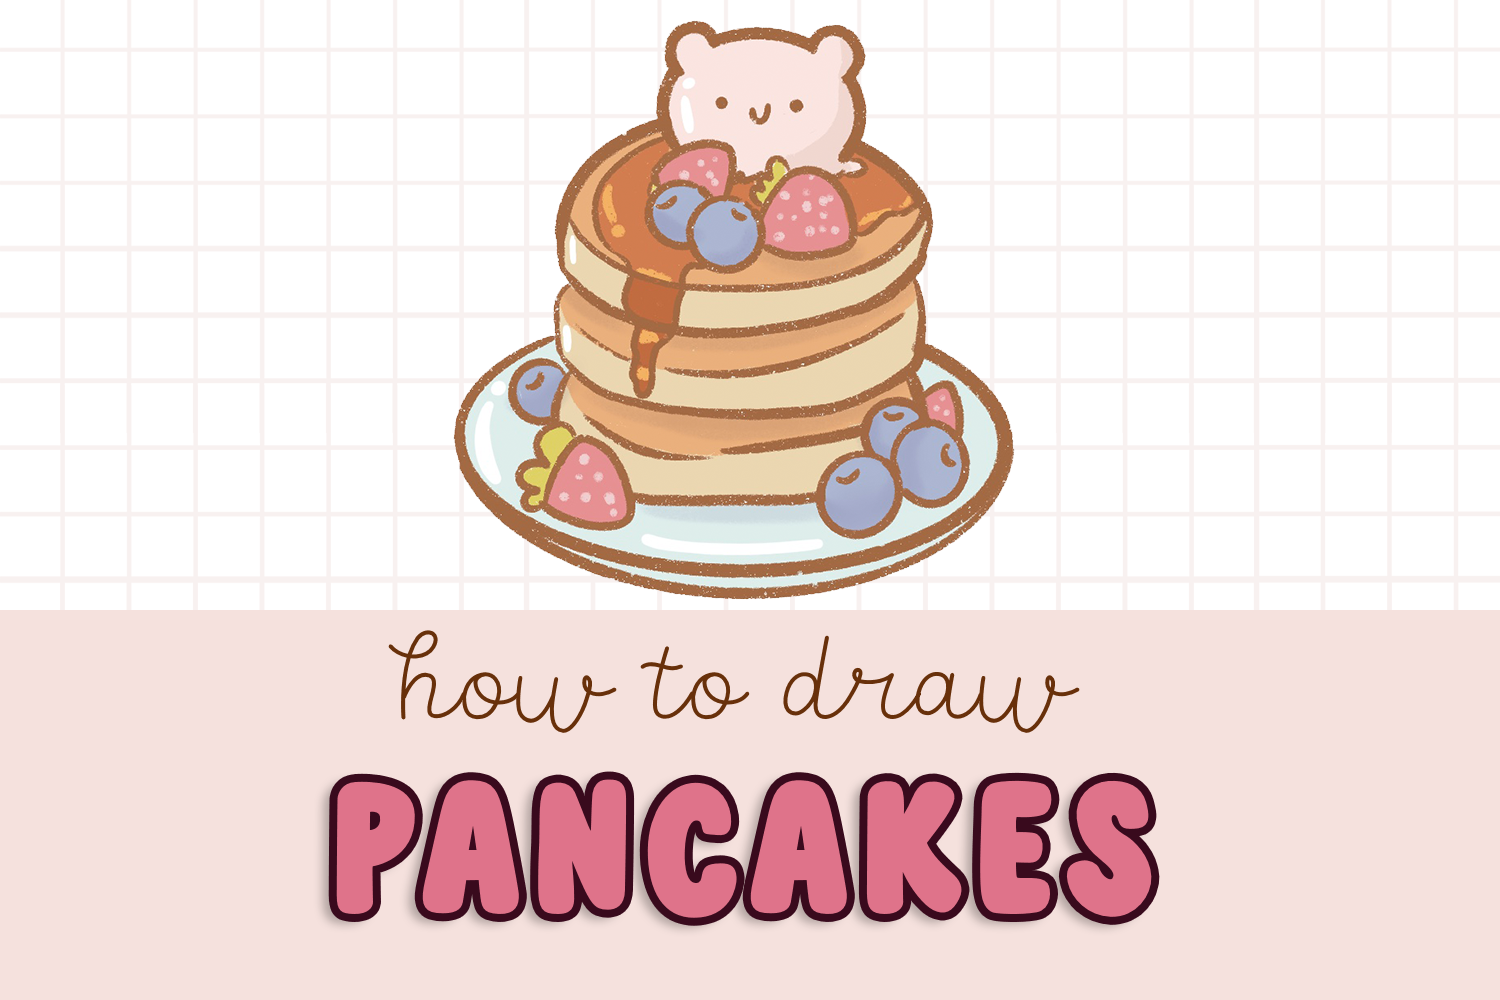 Pancake Images | Free Photos, PNG Stickers, Wallpapers & Backgrounds -  rawpixel